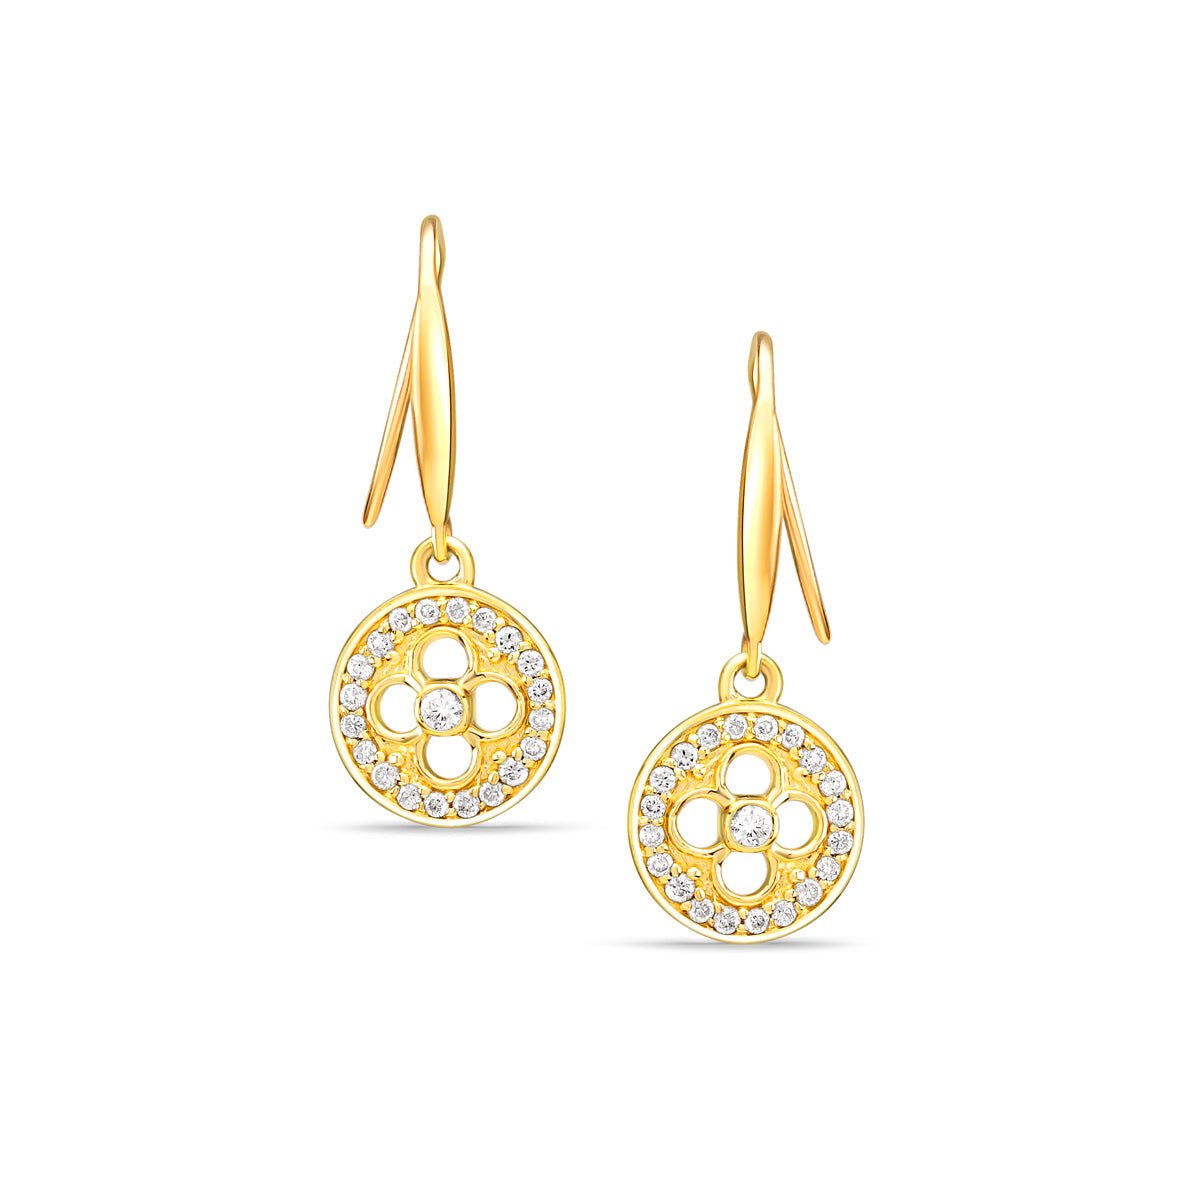 Diamond Clover Outline Drop Earrings Earrings Estella Collection #product_description# 17343 14k cartilage hoop Colorless Gemstone #tag4# #tag5# #tag6# #tag7# #tag8# #tag9# #tag10#